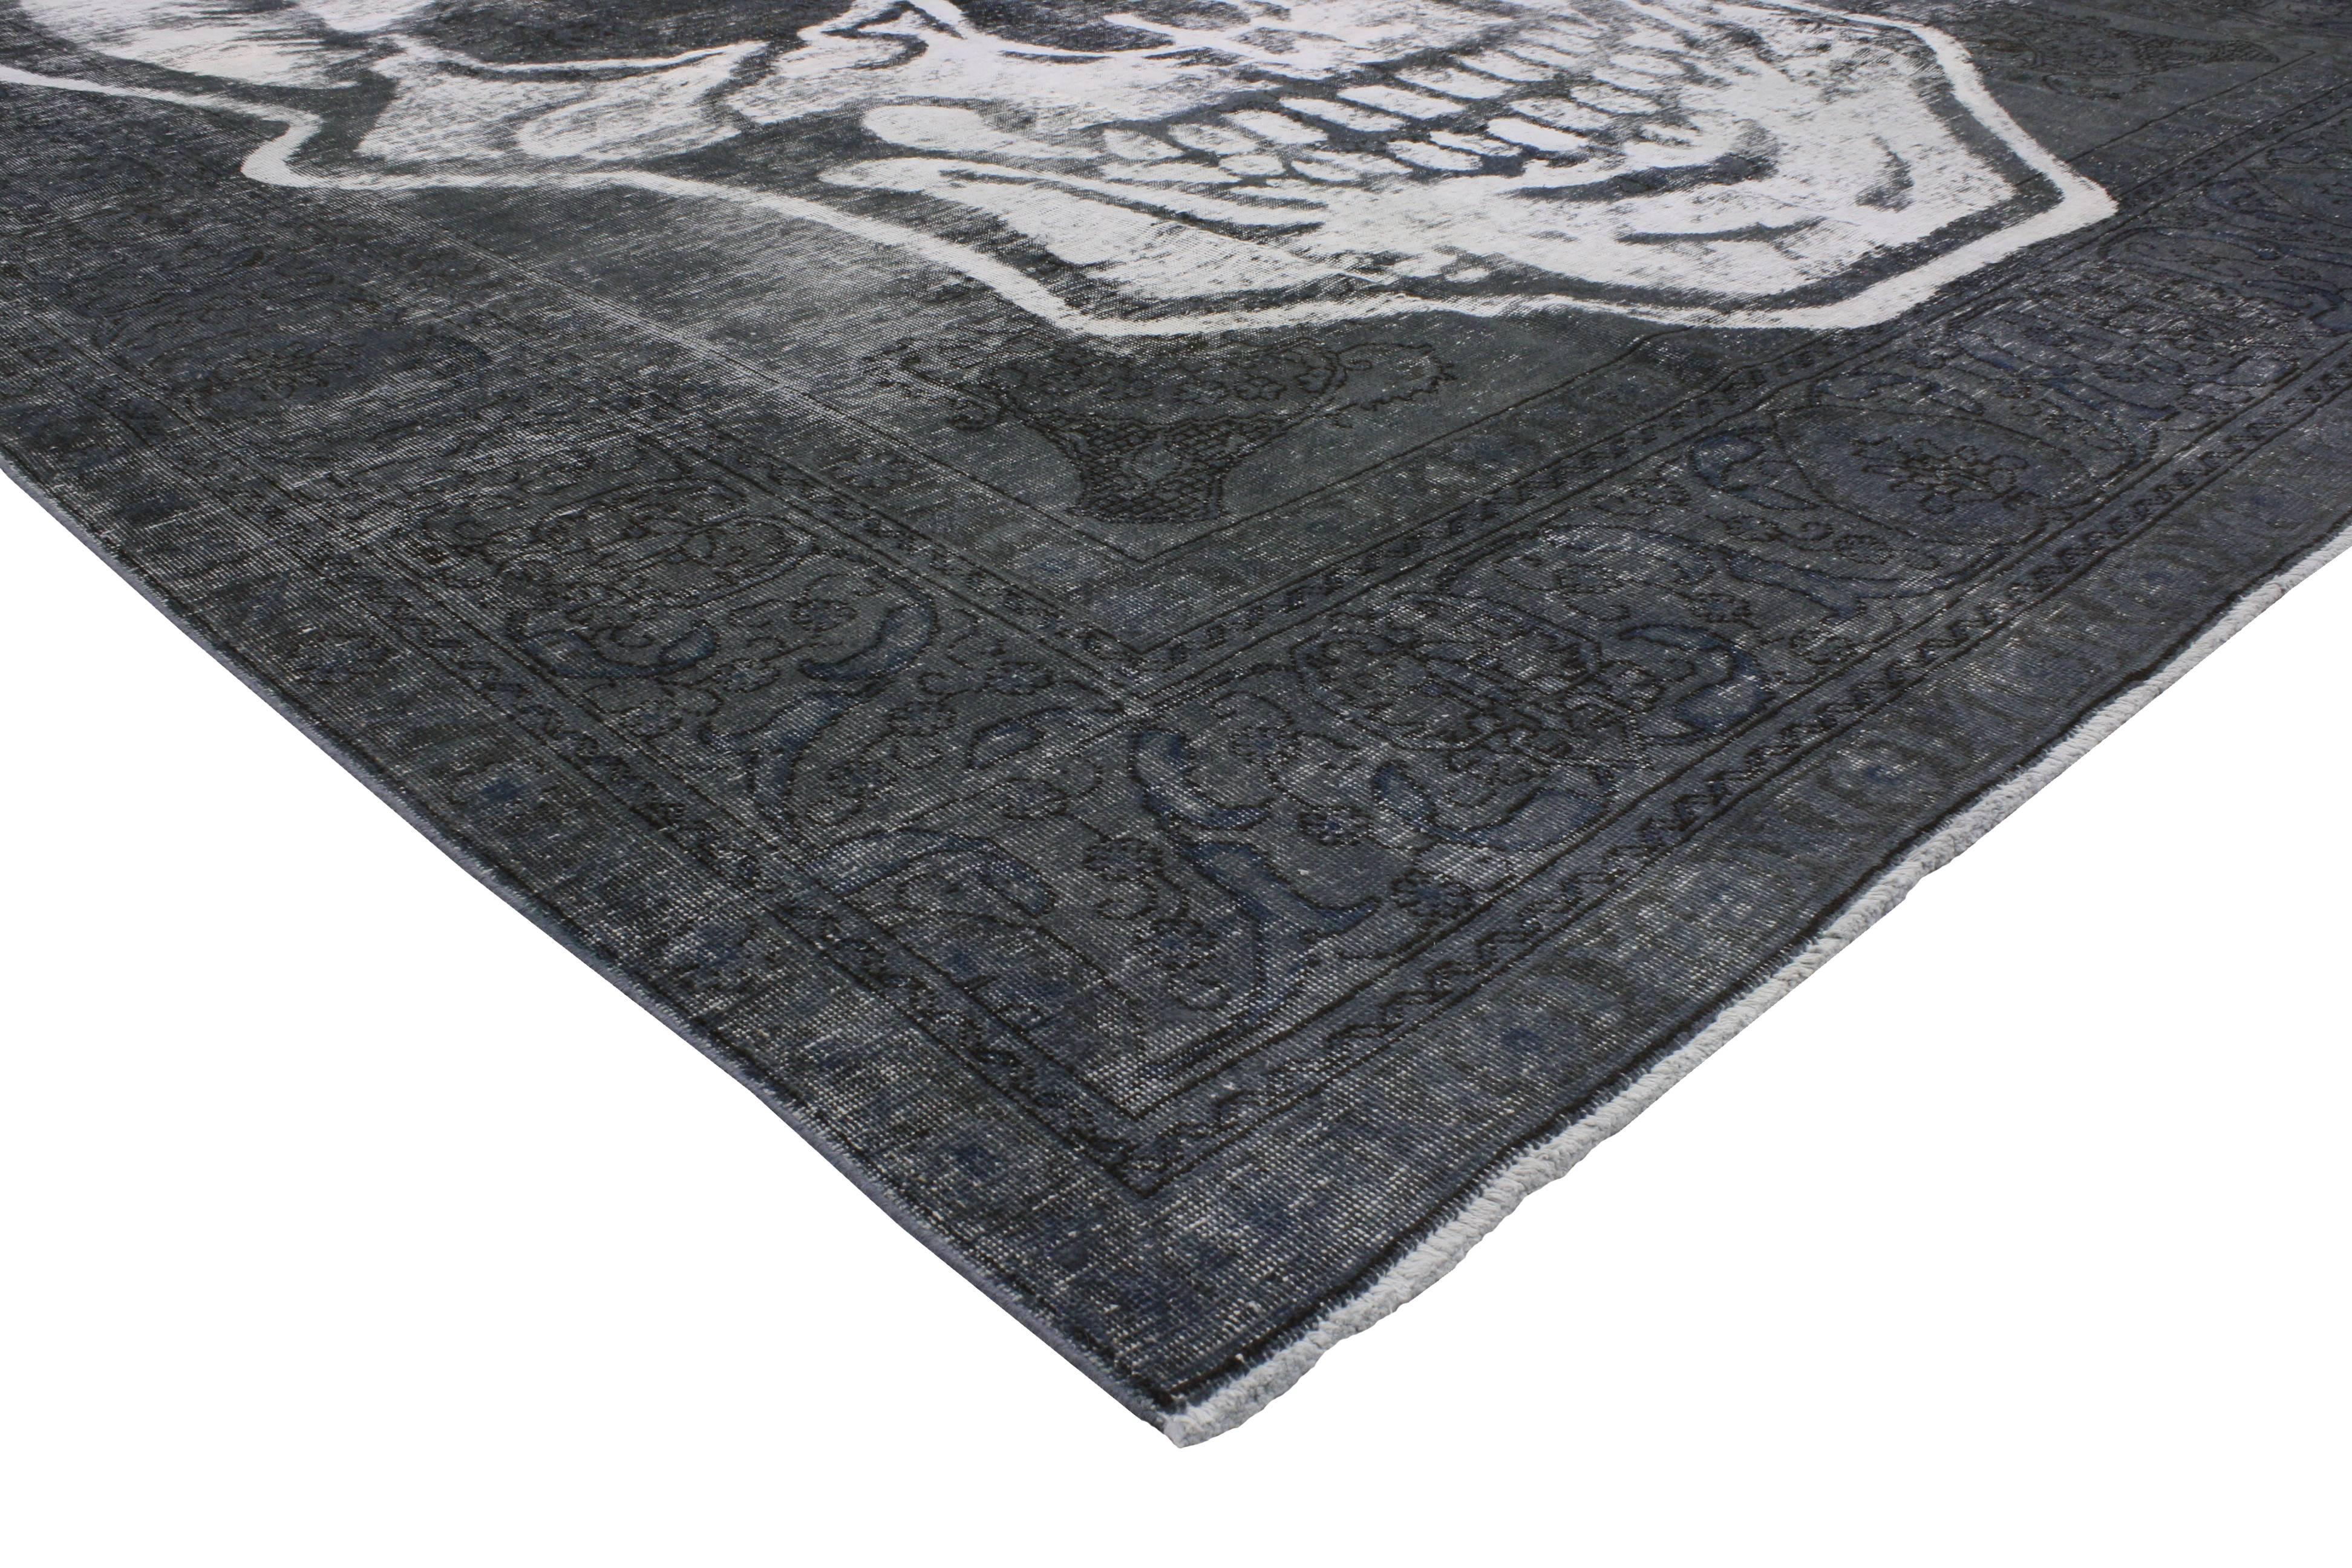 80275 Distressed Vintage Overdyed Skull Rug Inspired by Alexander McQueen 09'08 x 13'01. Showcasing an expressive design with artful craftsmanship and incredible detail, this hand knotted wool distressed vintage overdyed skull rug is a captivating